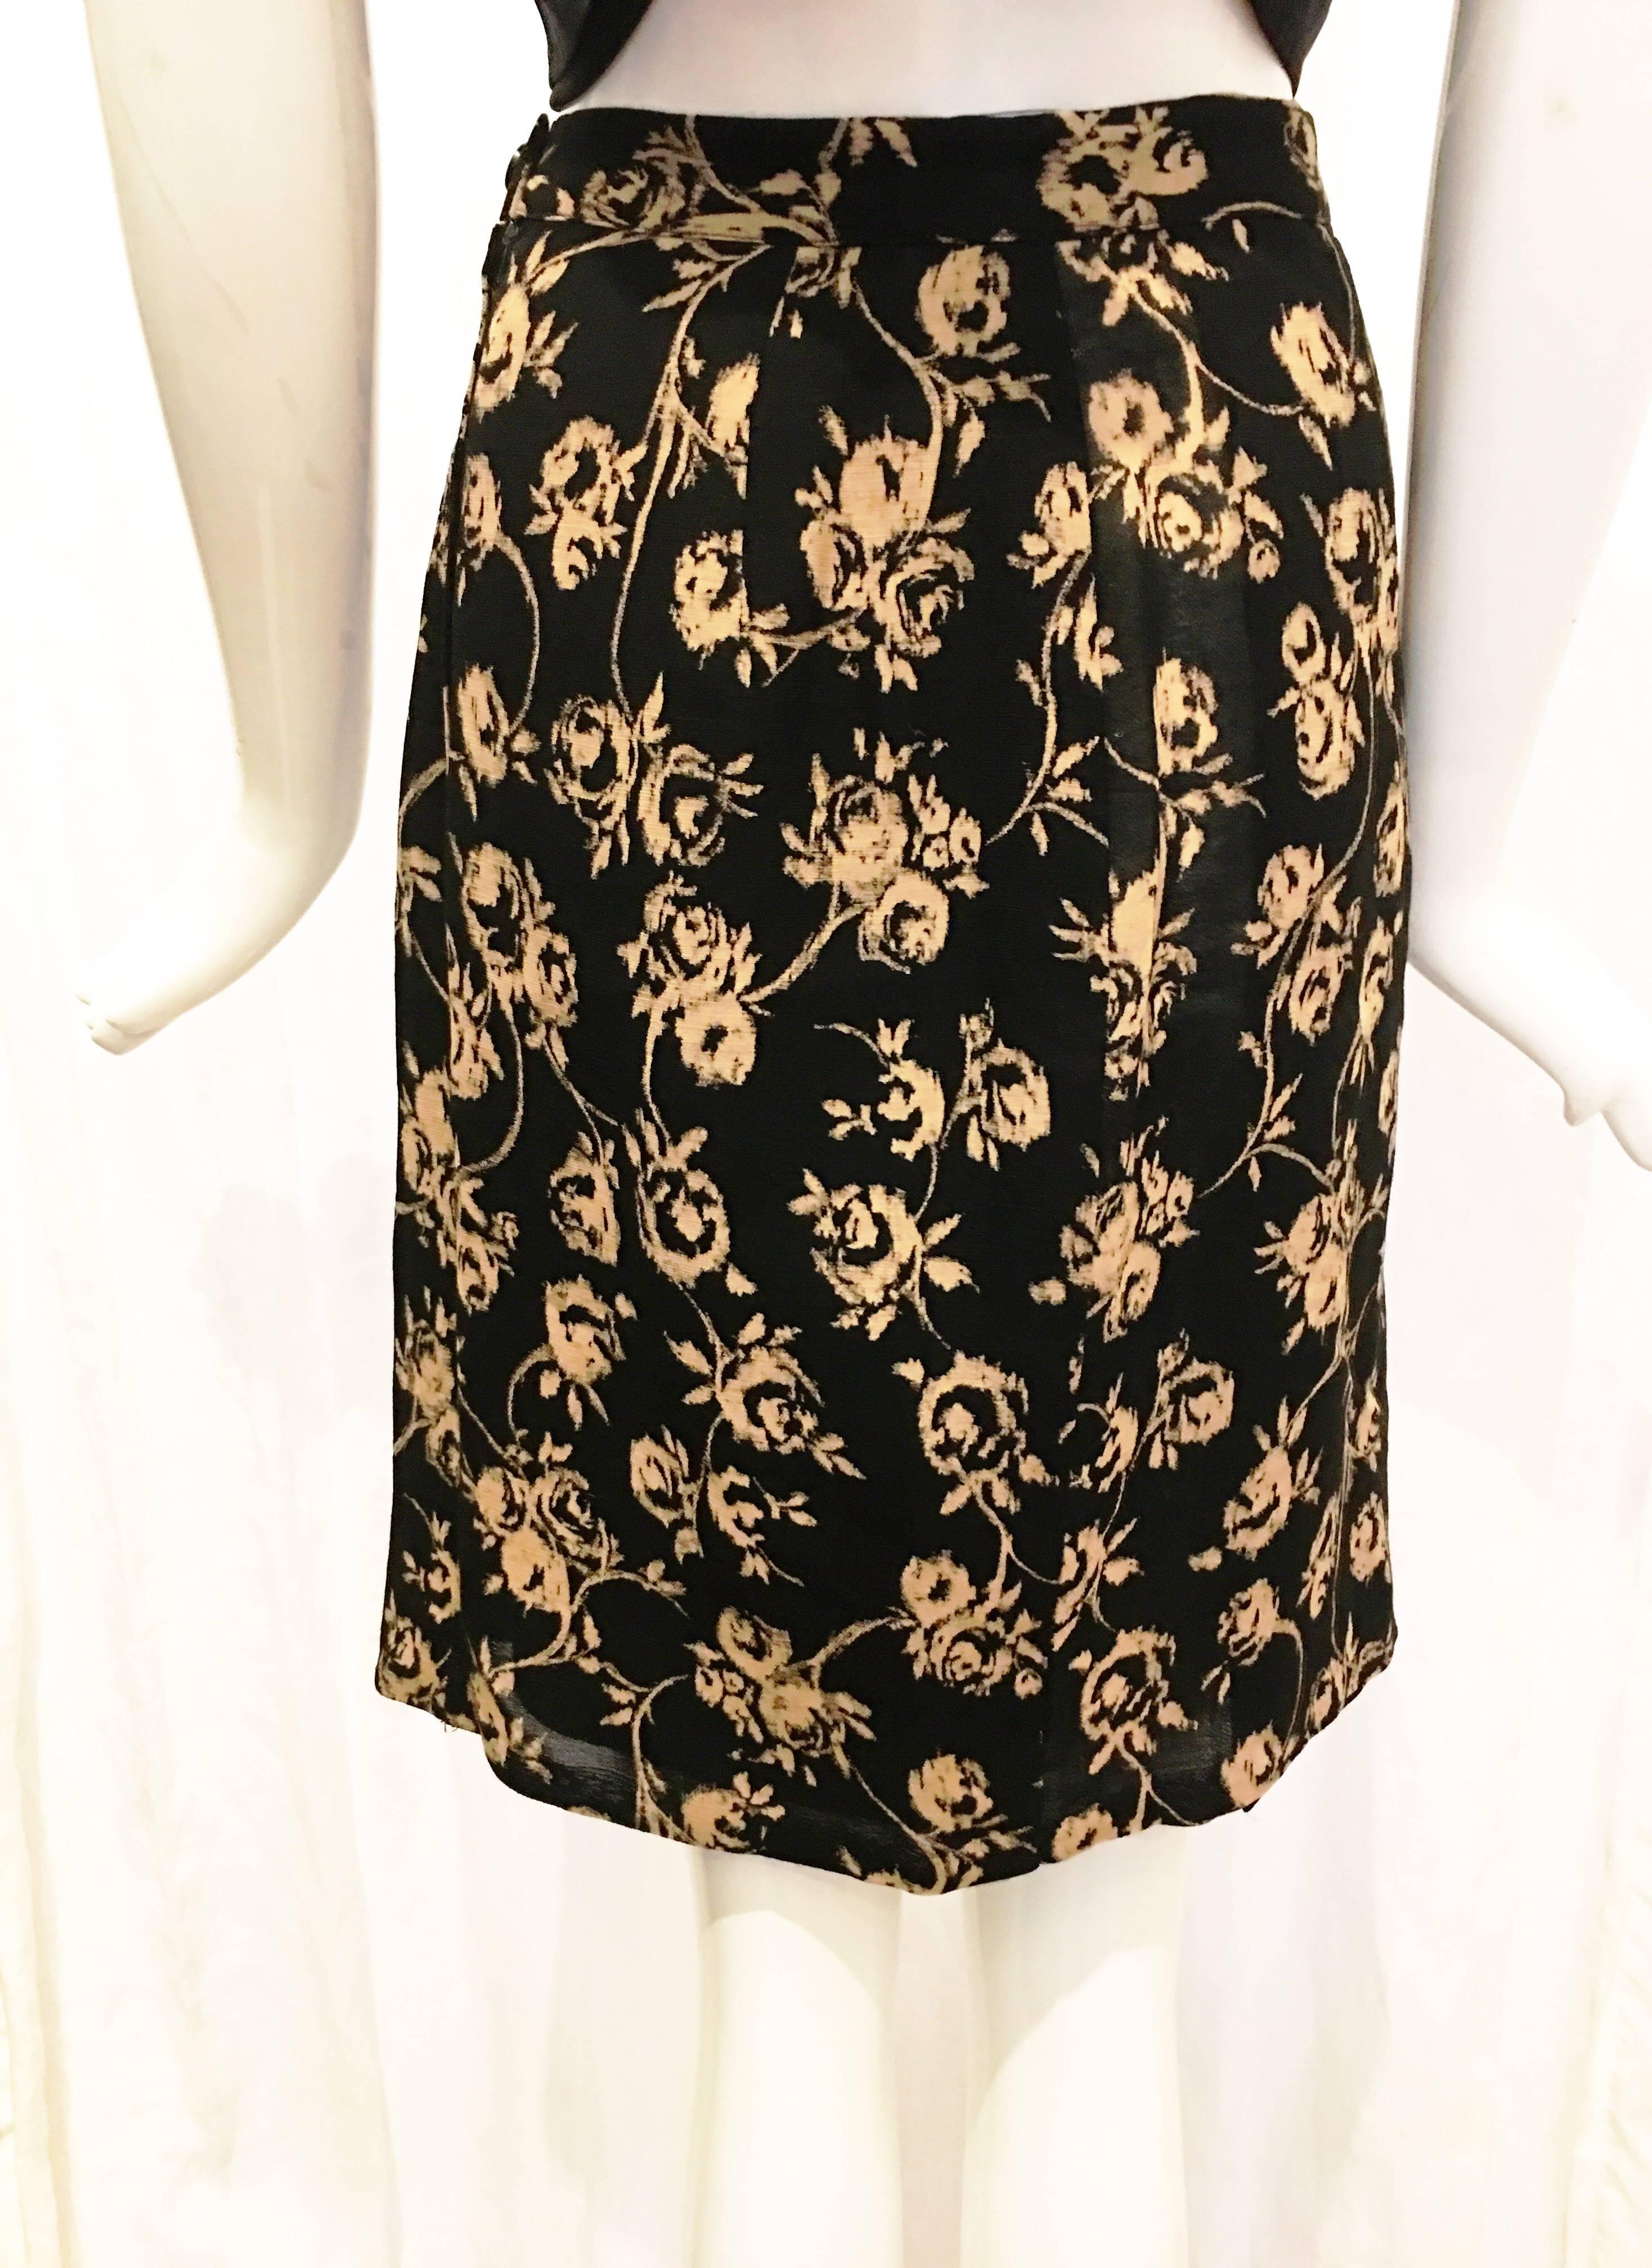 Ungaro Solo Donna Black Flower Skirt In Excellent Condition For Sale In Brooklyn, NY